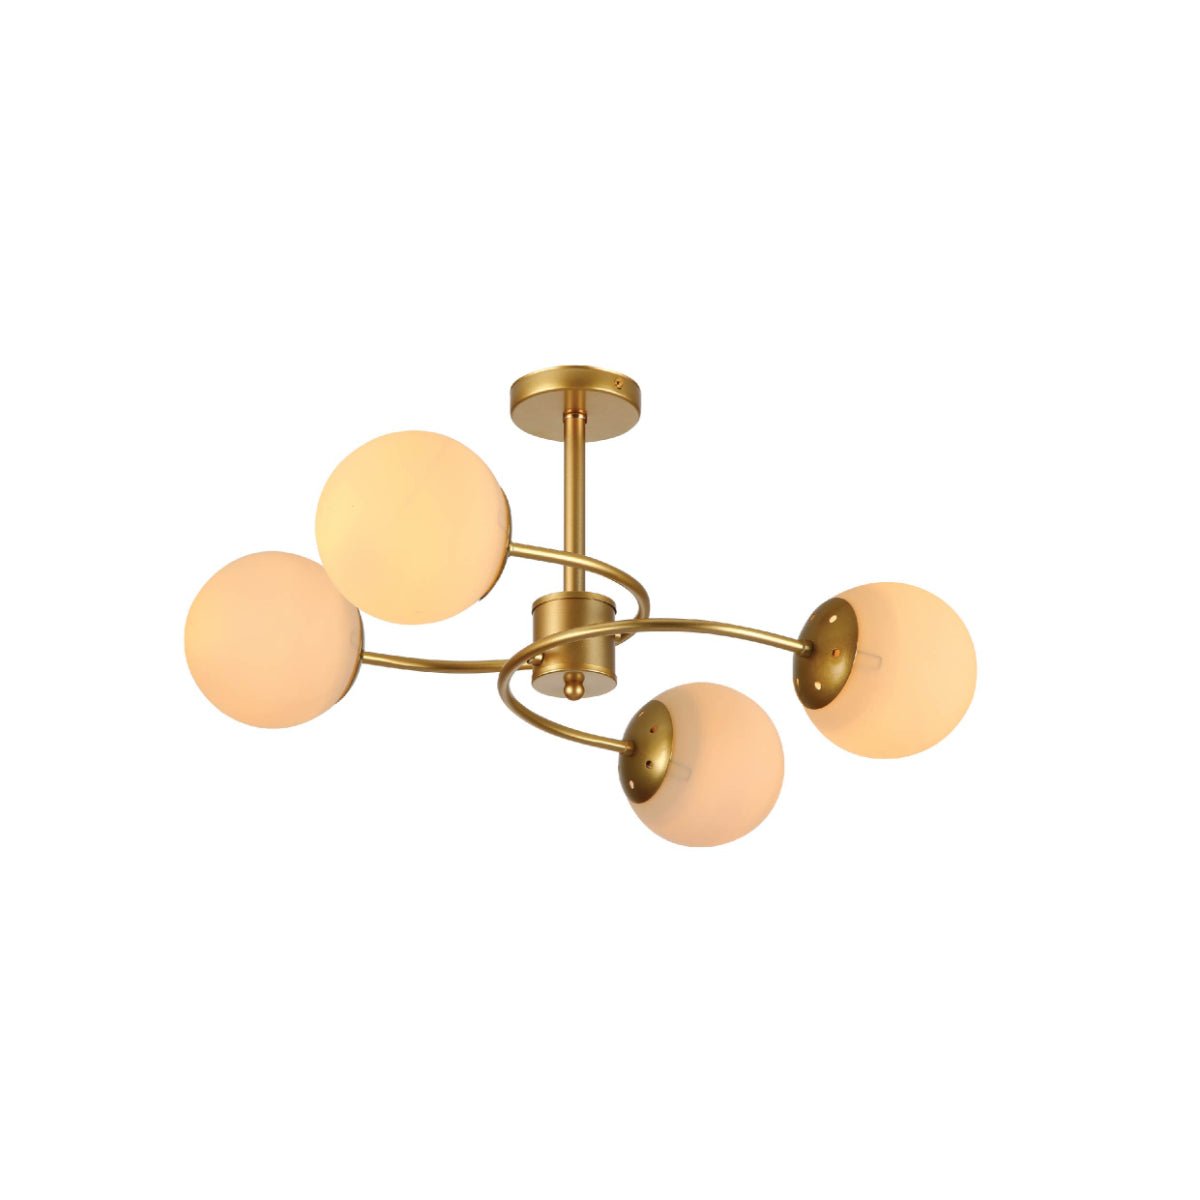 Main image of Gold Crescent Body Opal Globe Ceiling Light with E27 Fittings | TEKLED 159-17668